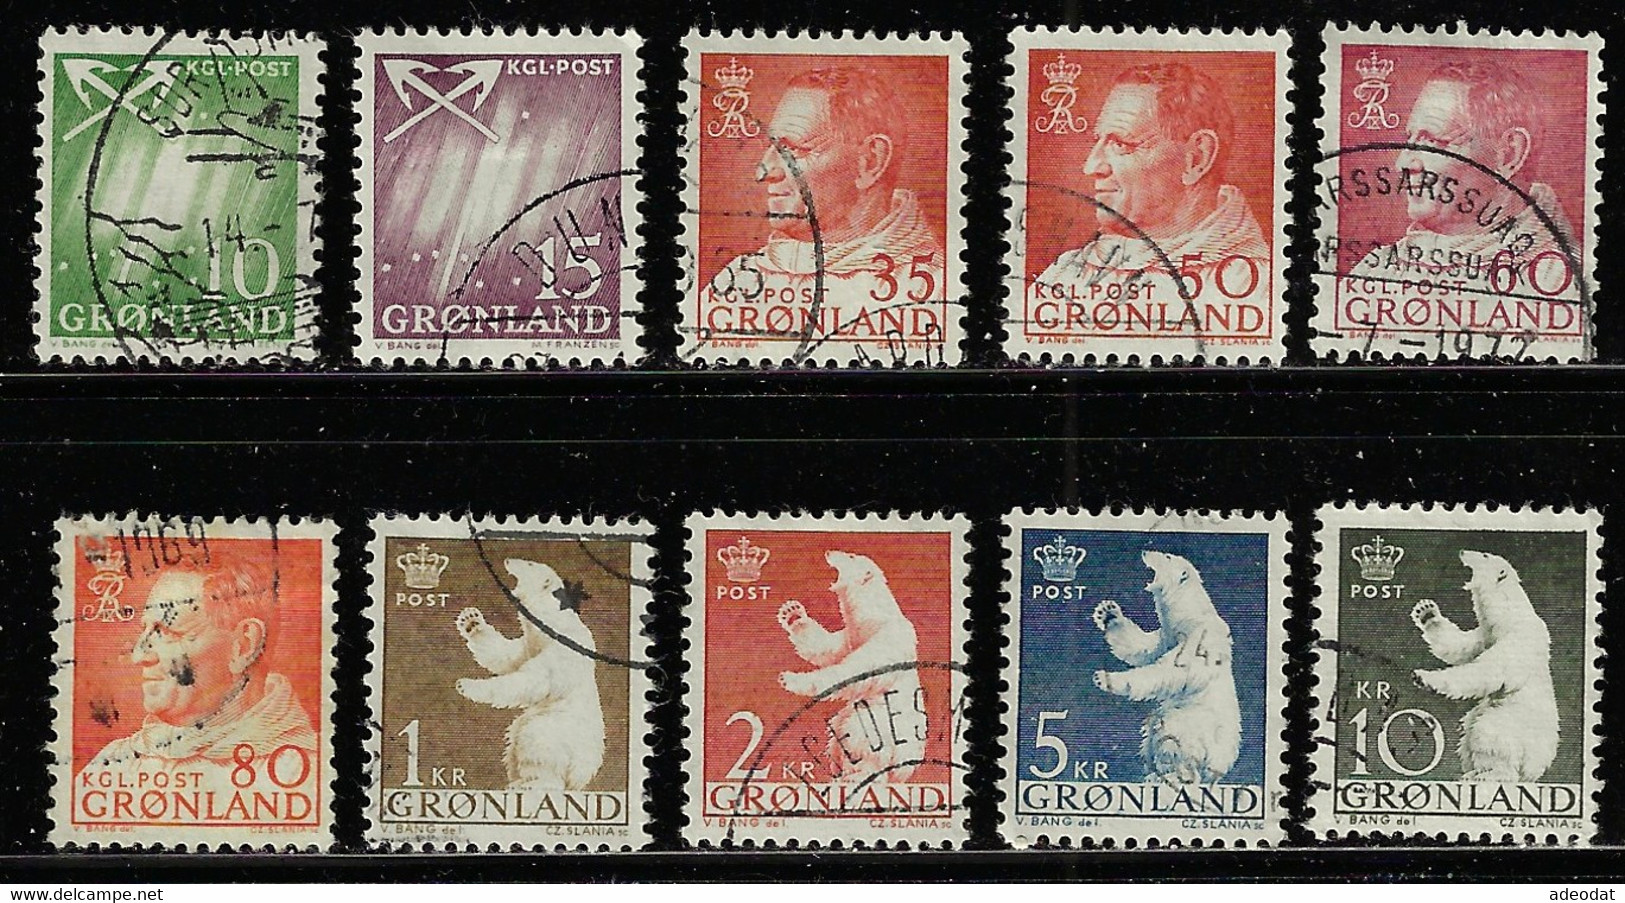 GREENLAND 1963-68 SCOTT 50,52,56,59-63 USED - Used Stamps